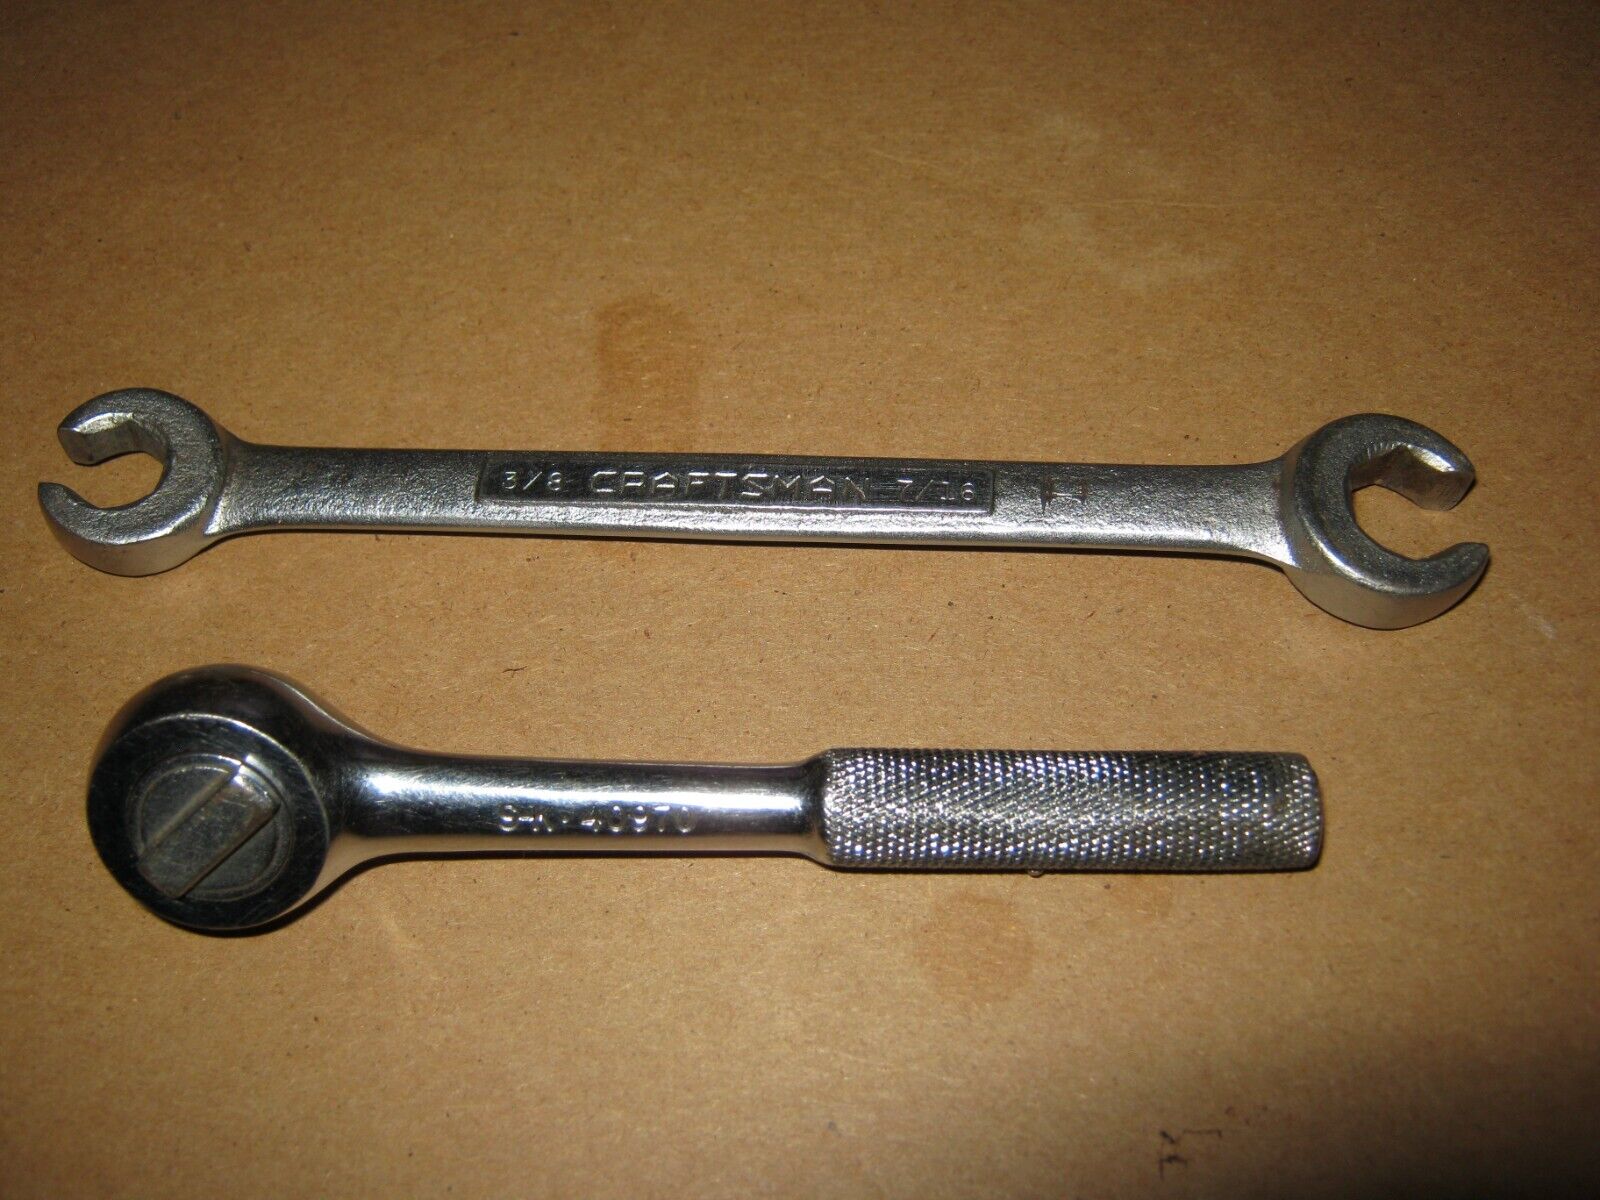 S-K  1/4 inch socket wrench & craftsman 3/8x7/16 line wrench-used in  good cond.